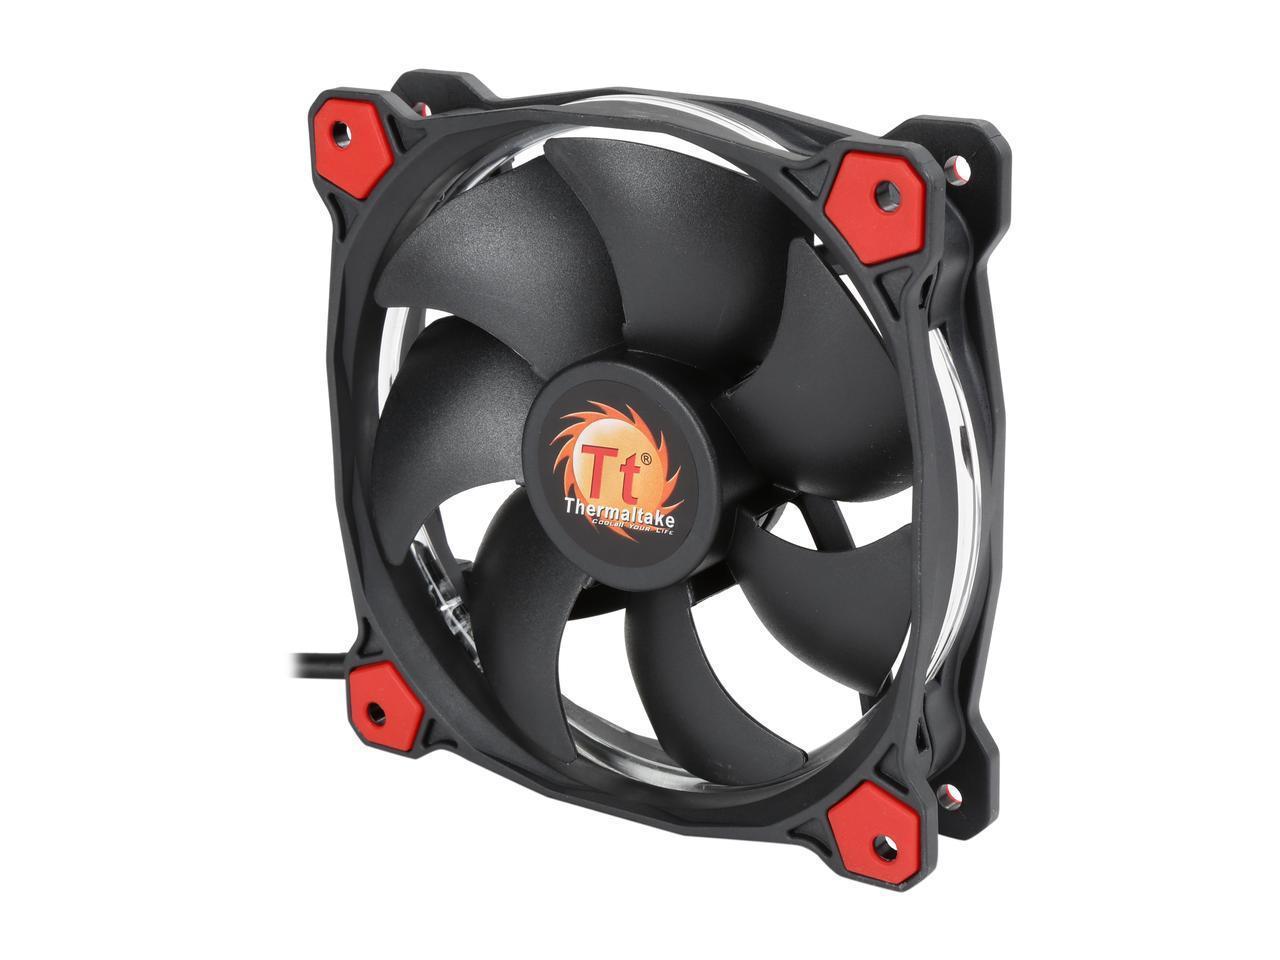 Thermaltake CL-F055-PL12RE-A Riing 12 High Static Pressure 120mm Circular Ring LED Case/Radiator Fan with Anti-vibration Mounting System - Red - 3 PKS